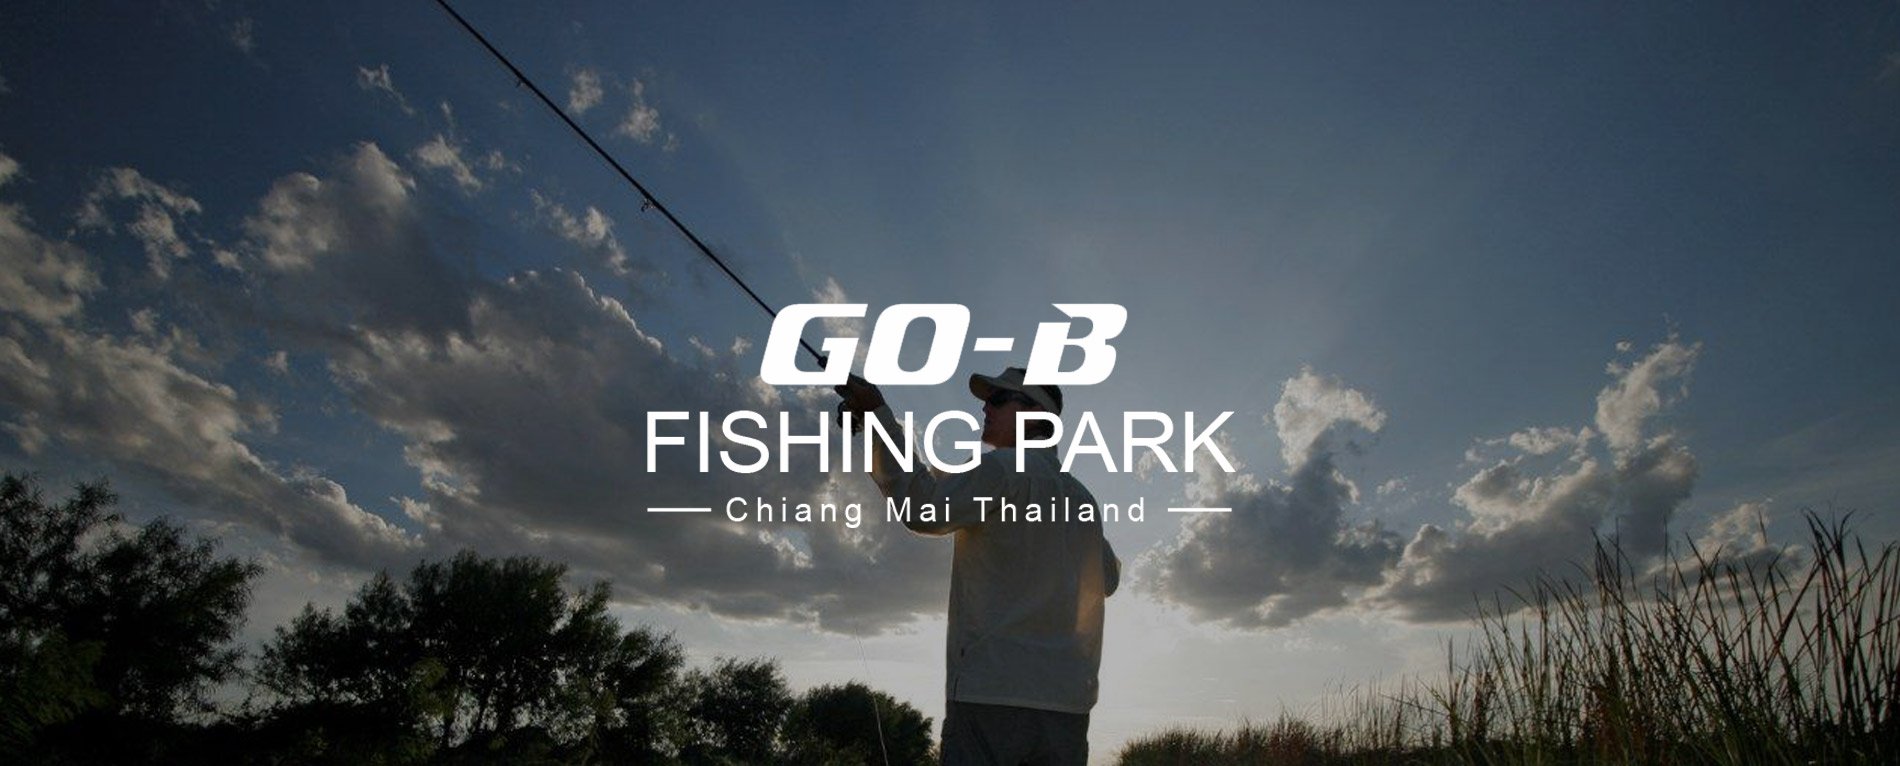 Full Day Fishing 9am-5pm - Includes transport to and from Hotel and 1 rods, bait, tackle, guide and meals + soft drinks 2,500 THB.  Ext.Reservation deposit 100%